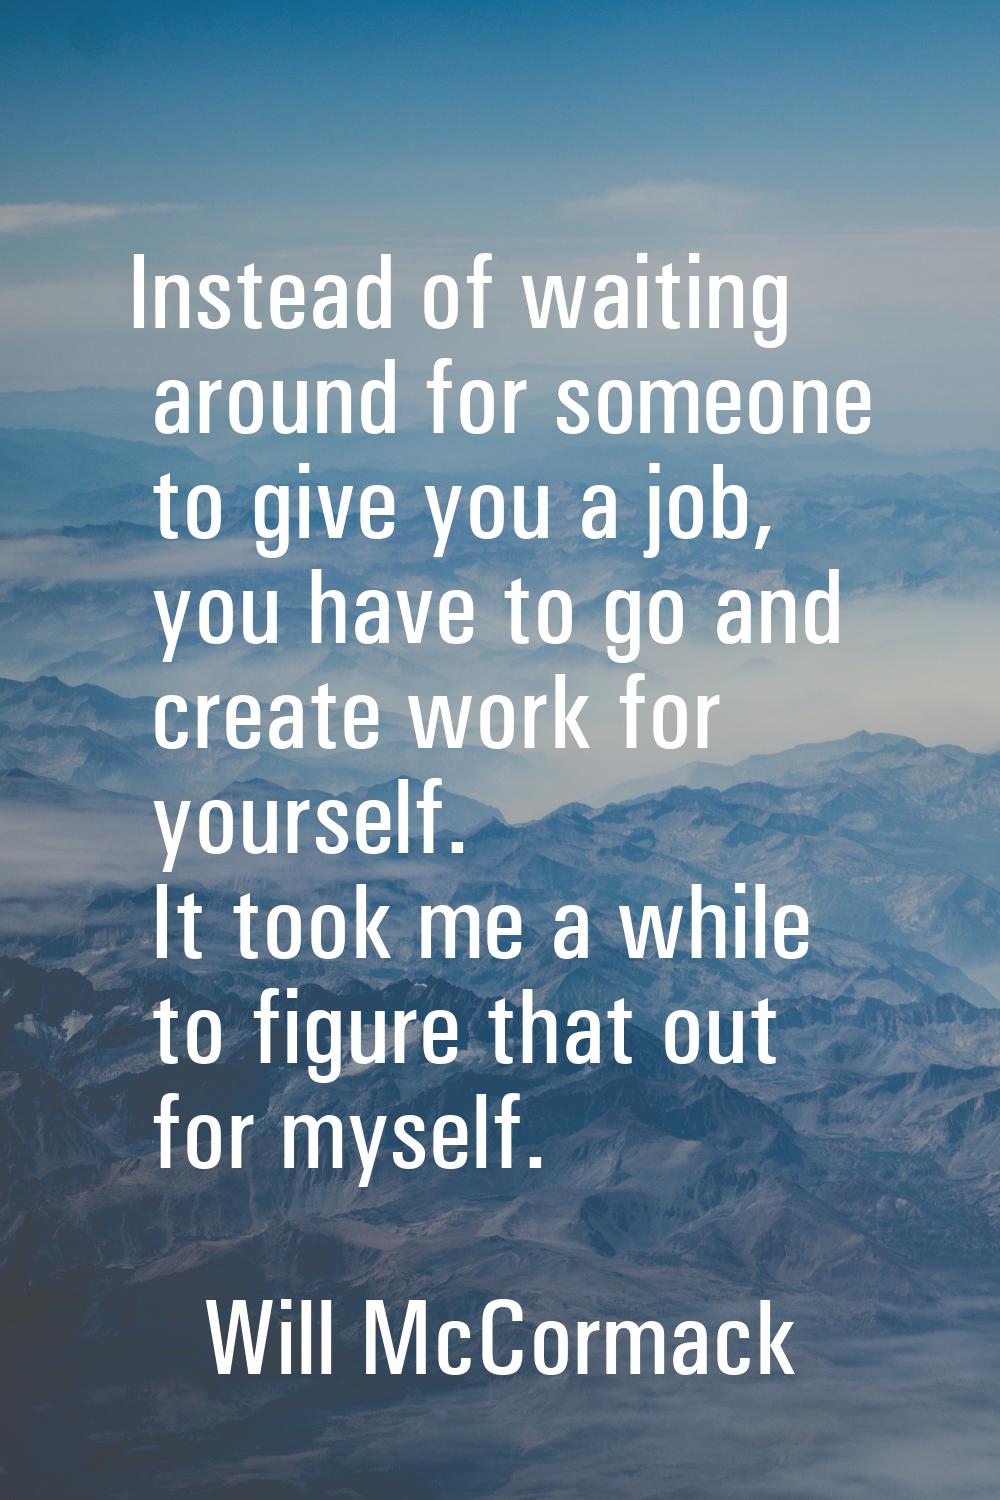 Instead of waiting around for someone to give you a job, you have to go and create work for yoursel